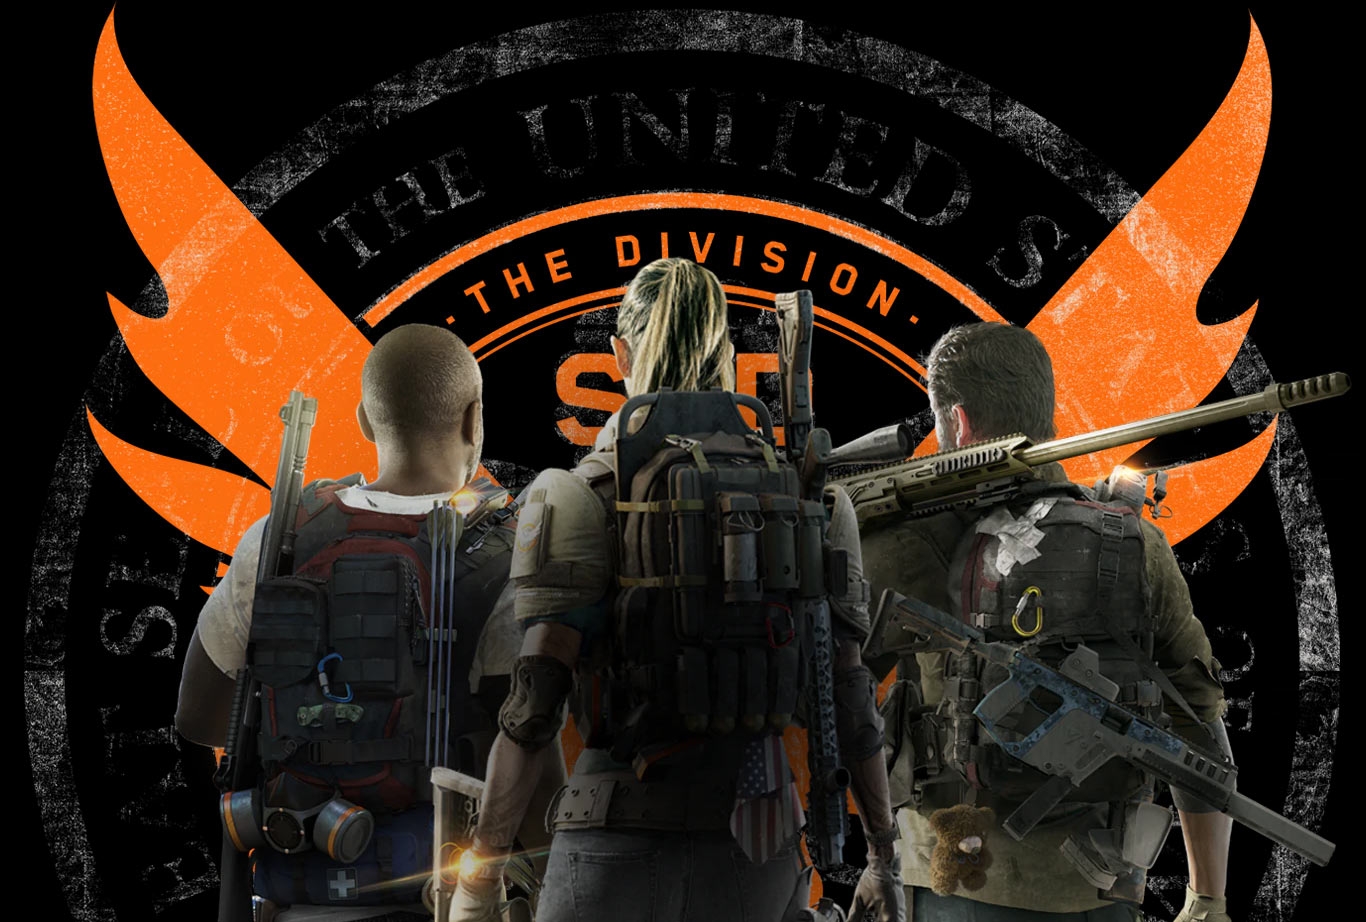 Tom the division steam фото 104